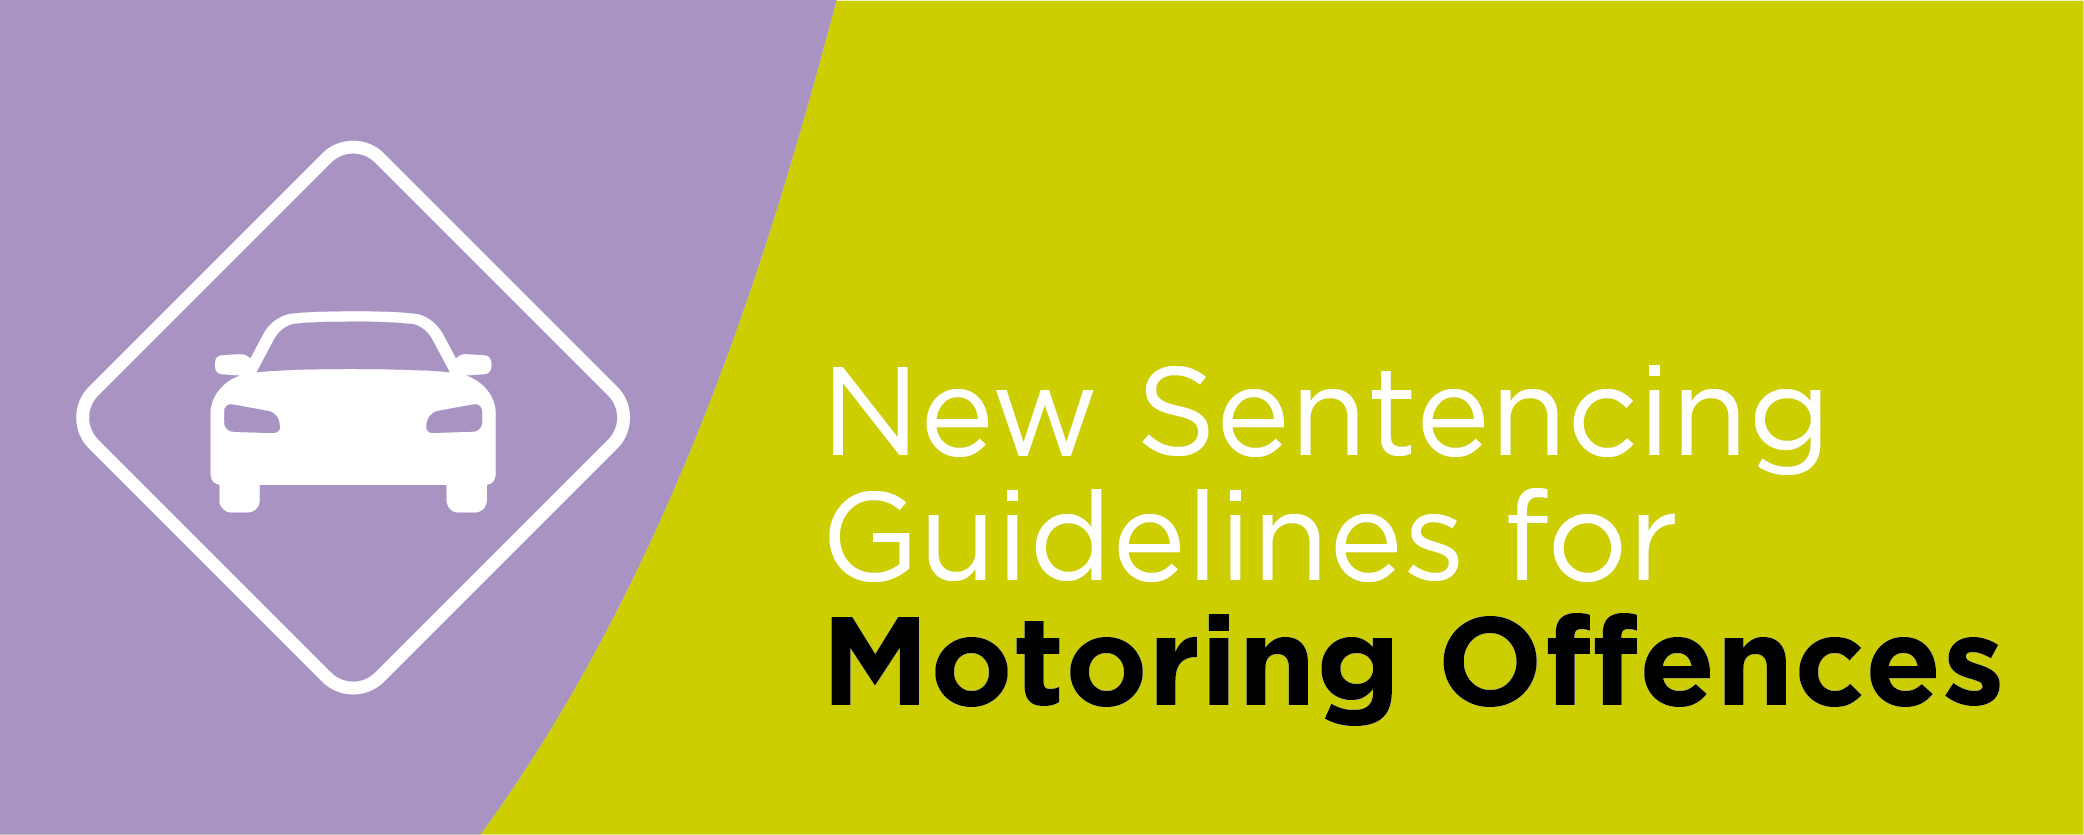 New Sentencing Guidelines for Motoring Offences